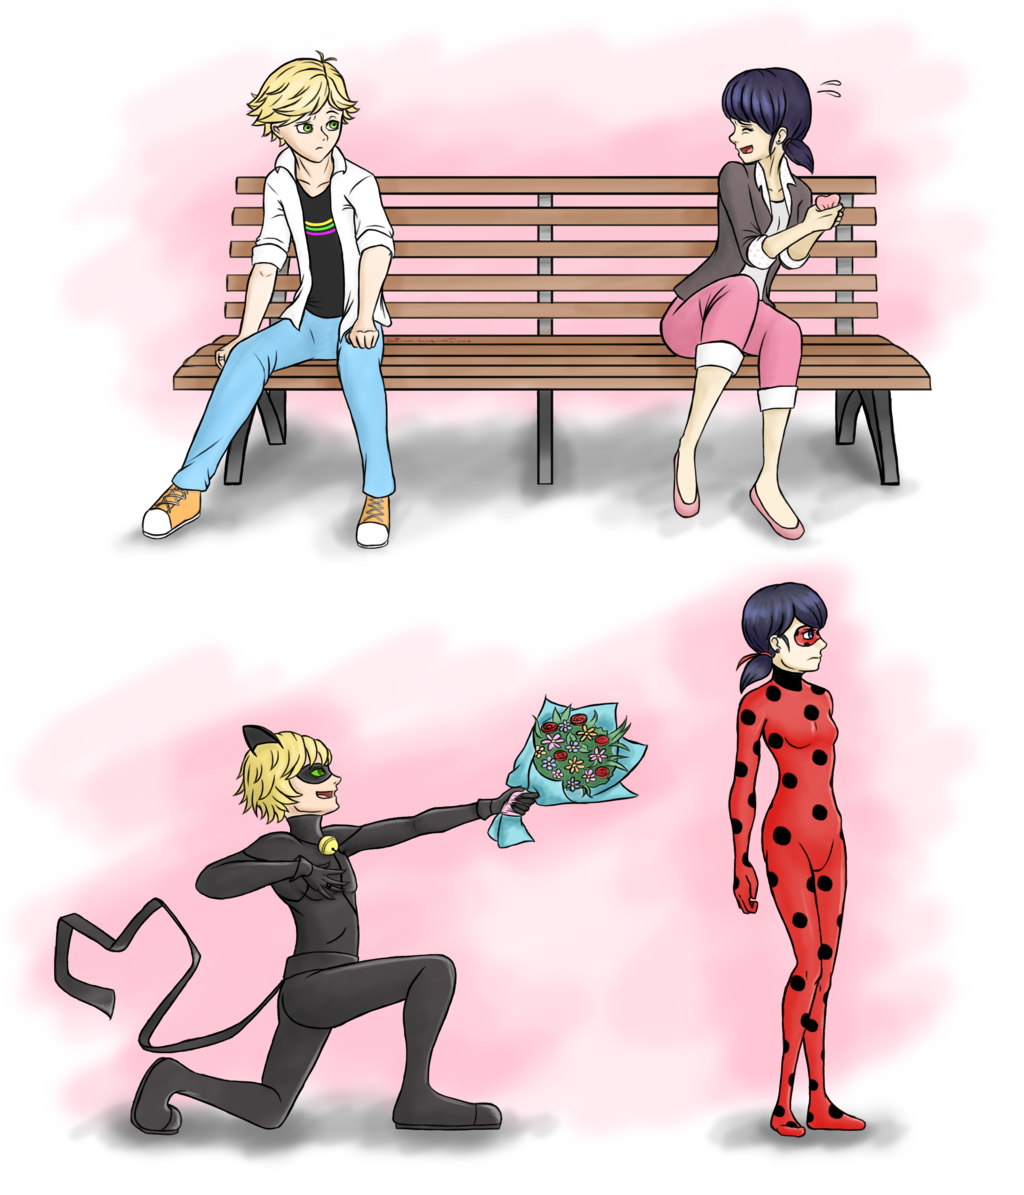 Marinette And Adrien Wallpapers Wallpaper Cave